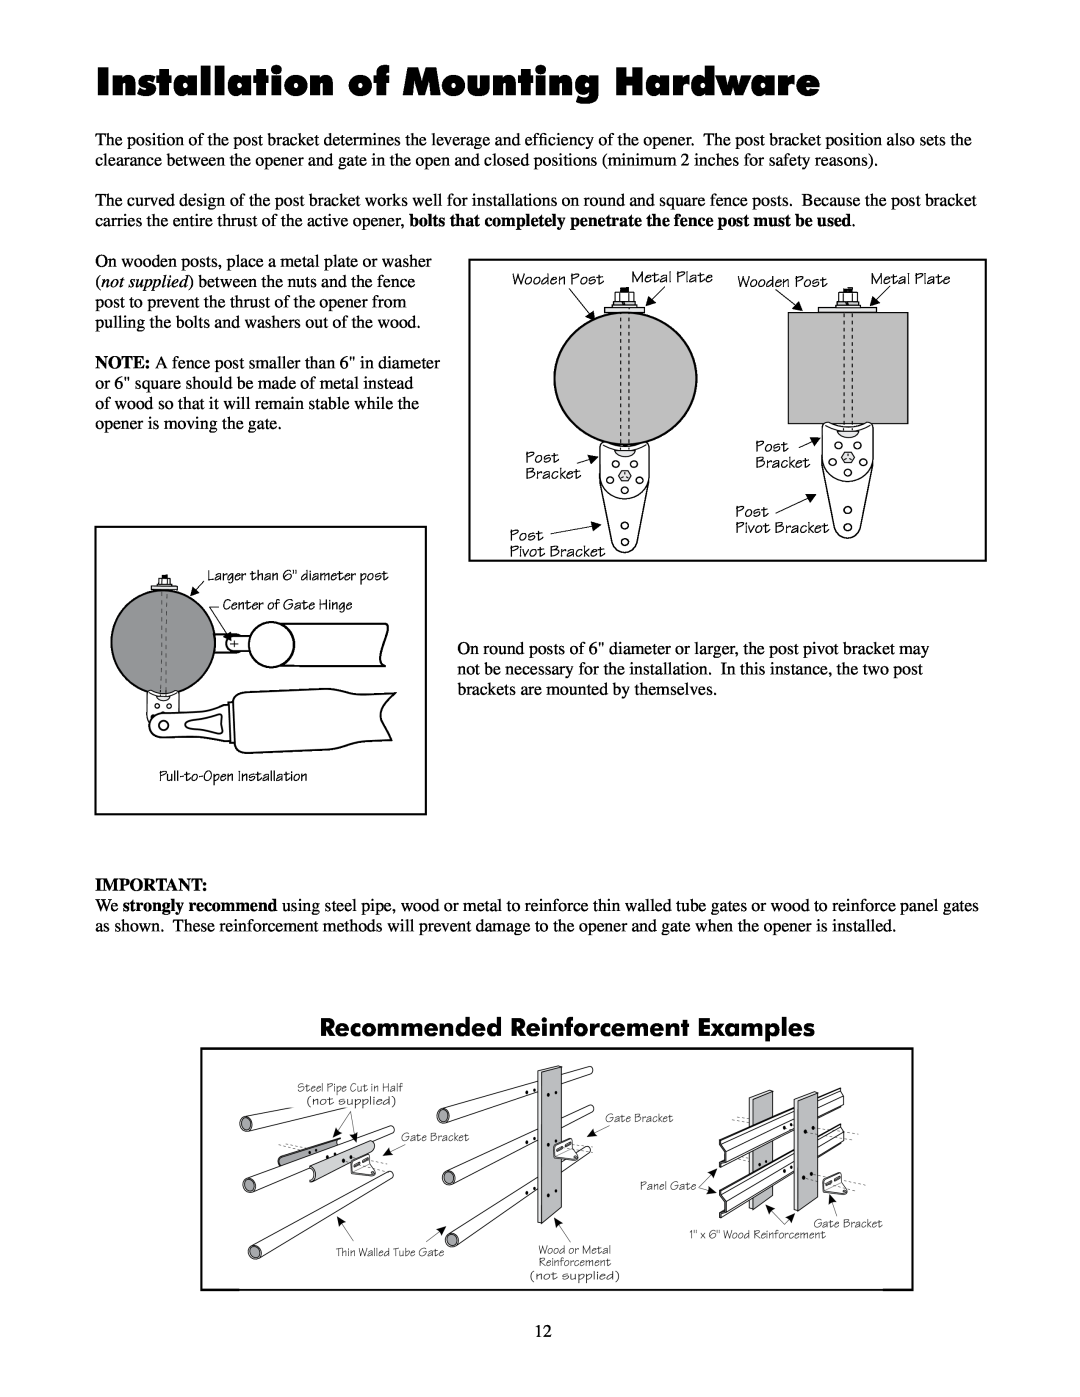 GTO UL325 SERIES installation manual Installation of Mounting Hardware, Recommended Reinforcement Examples 